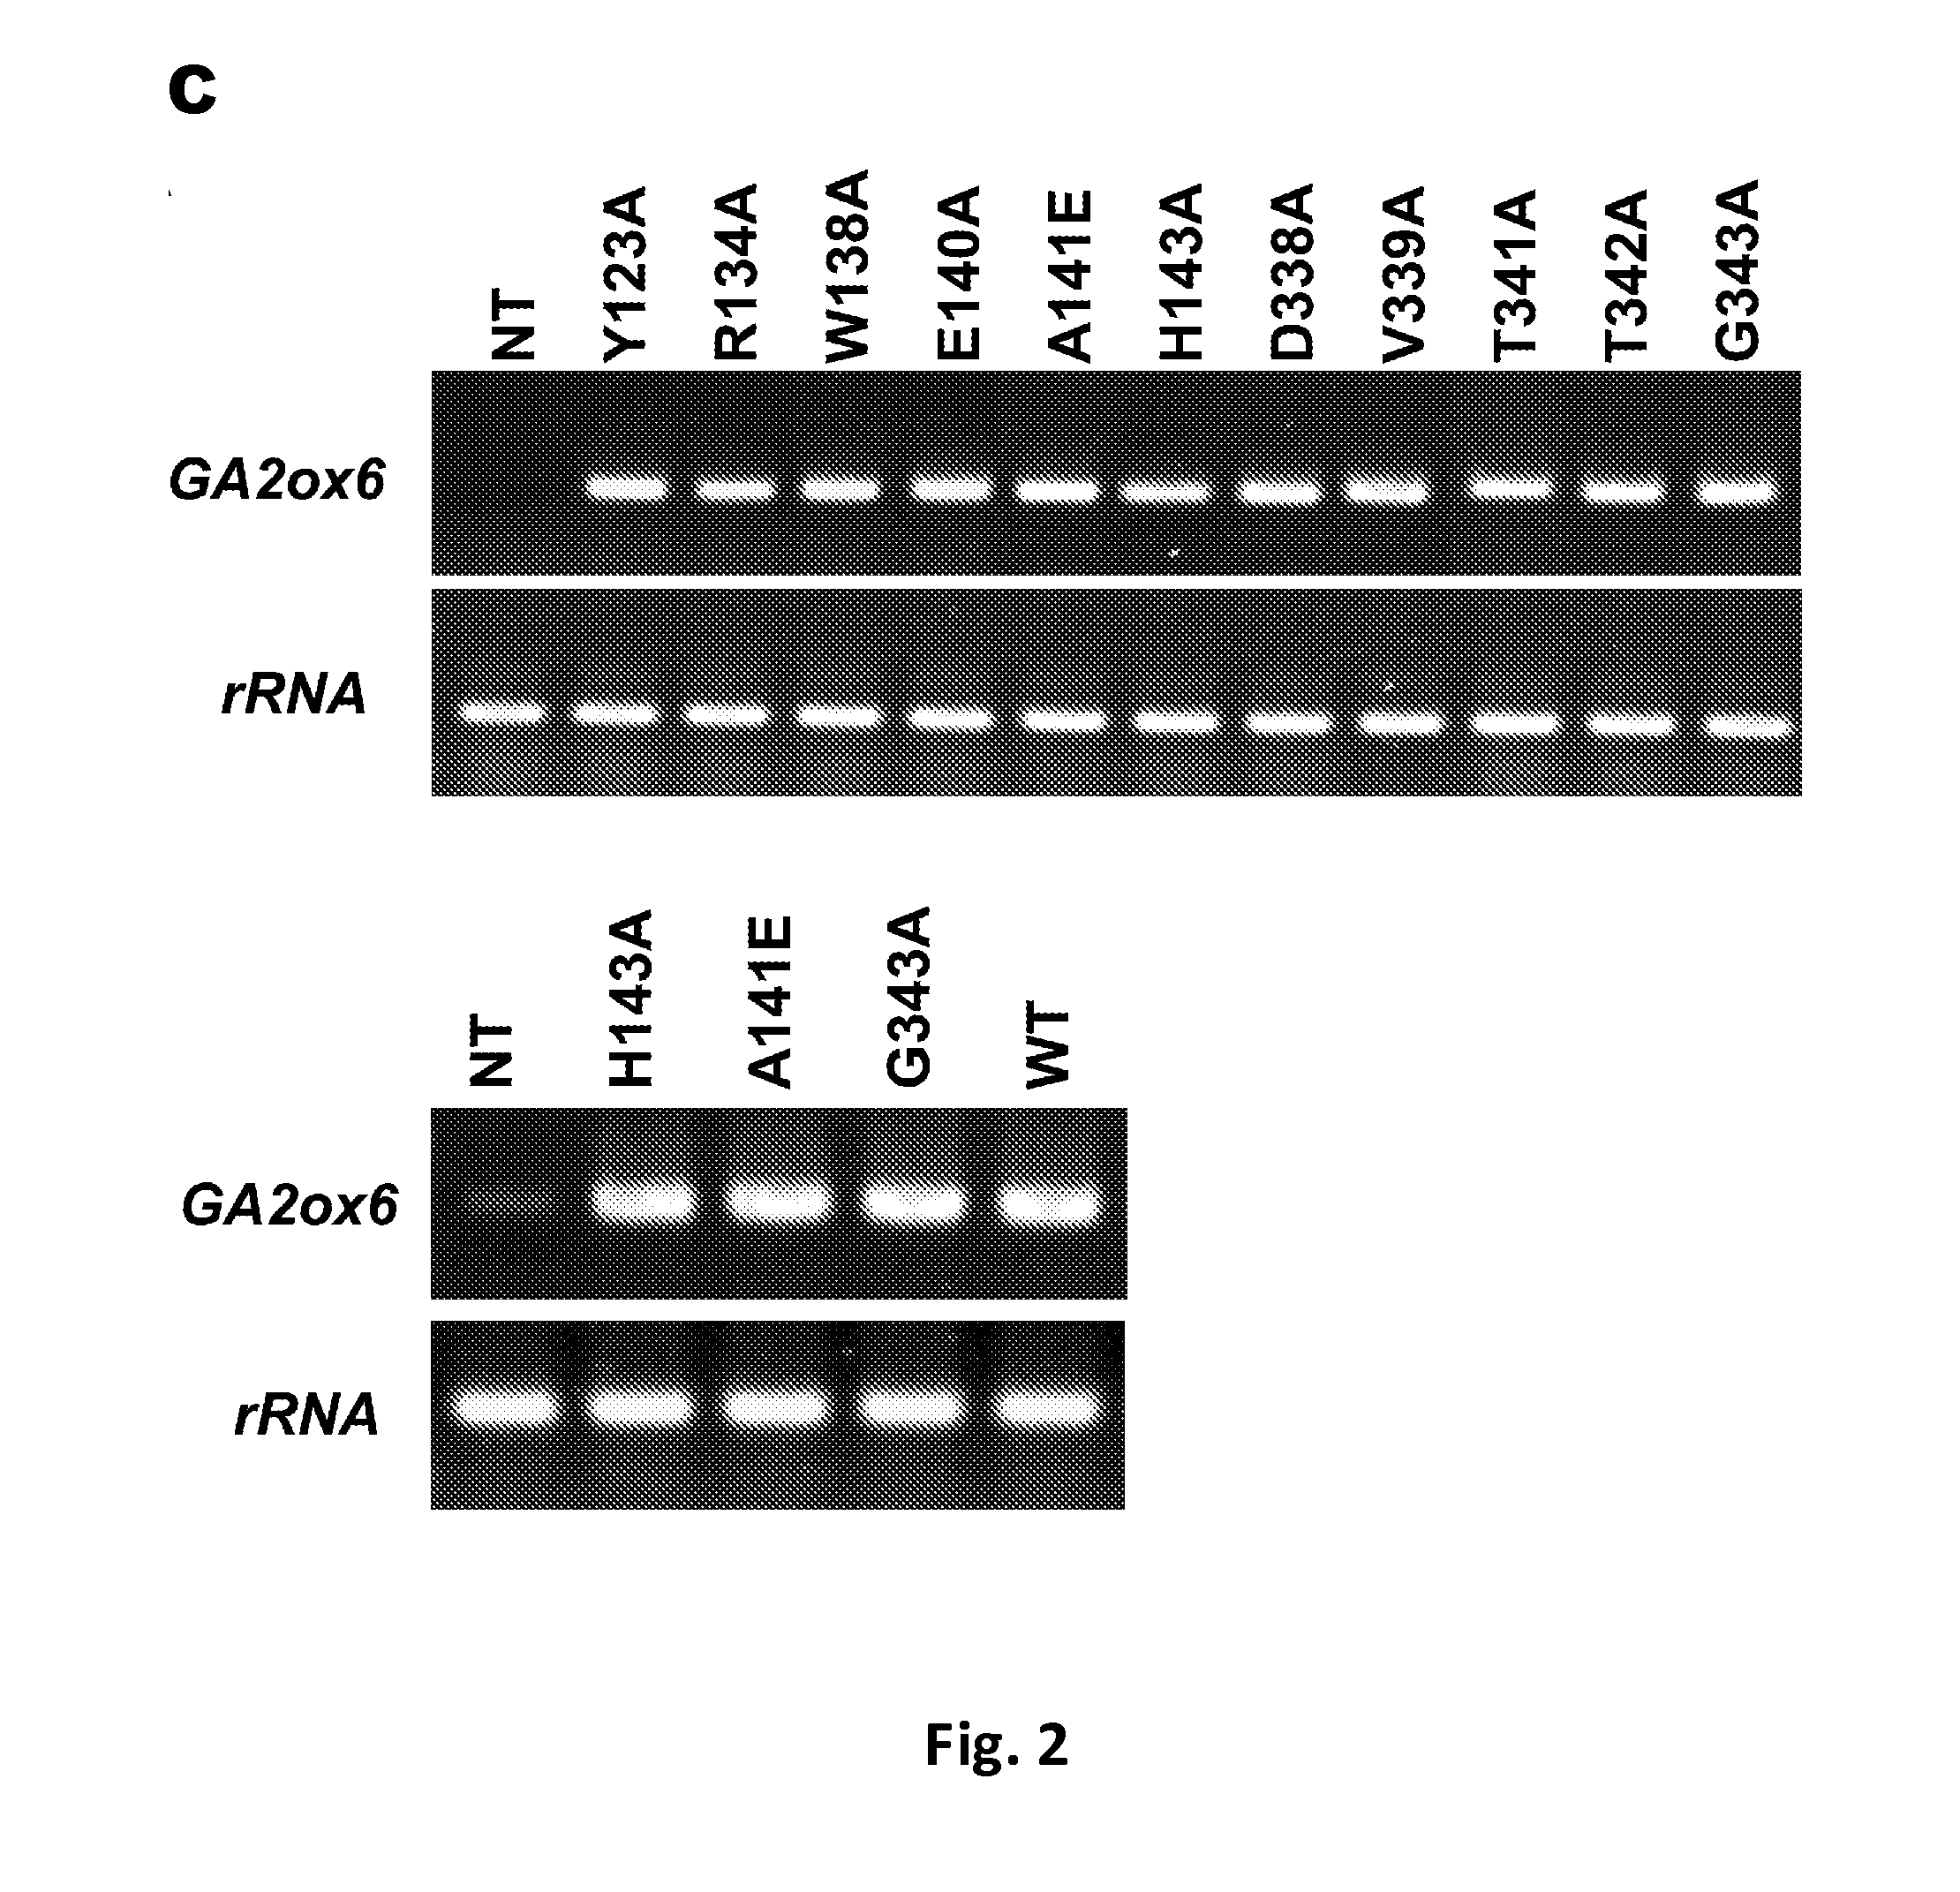 Mutant gibberellin 2-oxidase genes and uses thereof